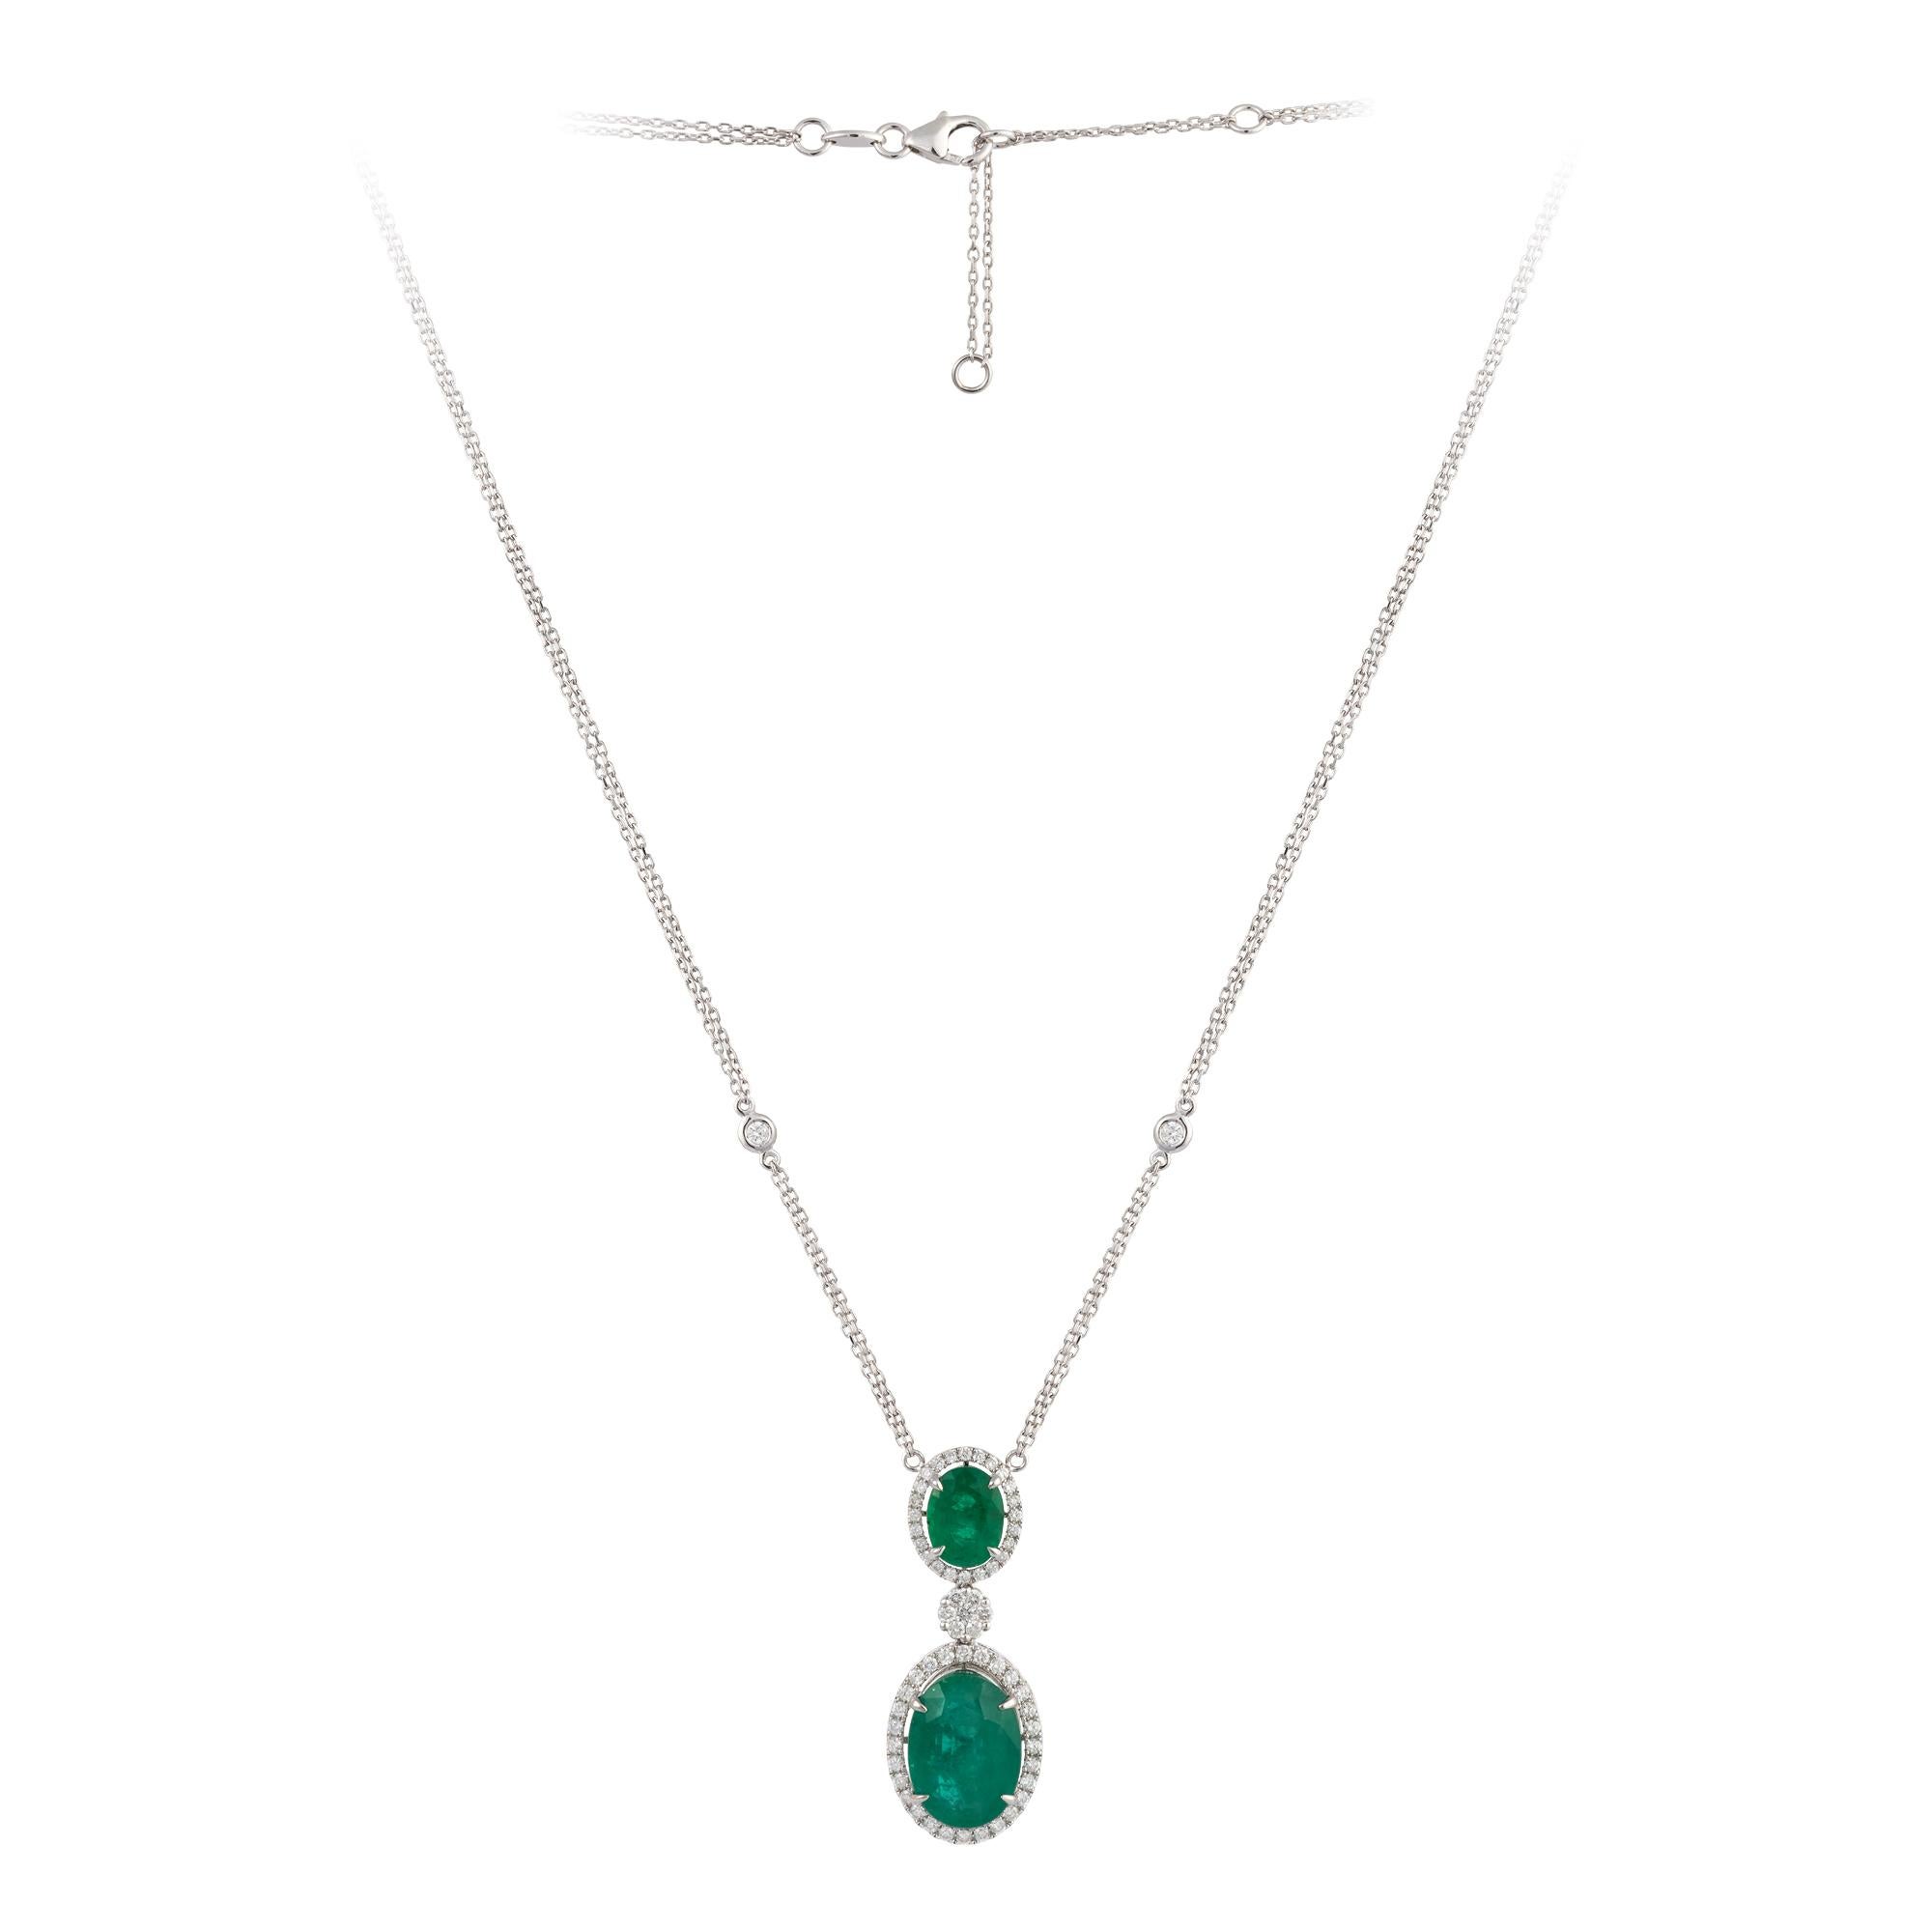 A Rare 18KT White Gold Emerald Diamond Necklace. Necklace is comprised of Finely Set Glittering Gorgeous Emeralds and Diamonds!!! The Emeralds and Diamonds are of Exquisite and Fine Quality. T.C.W. approx 9.50CTS!!! This Gorgeous Necklace is a